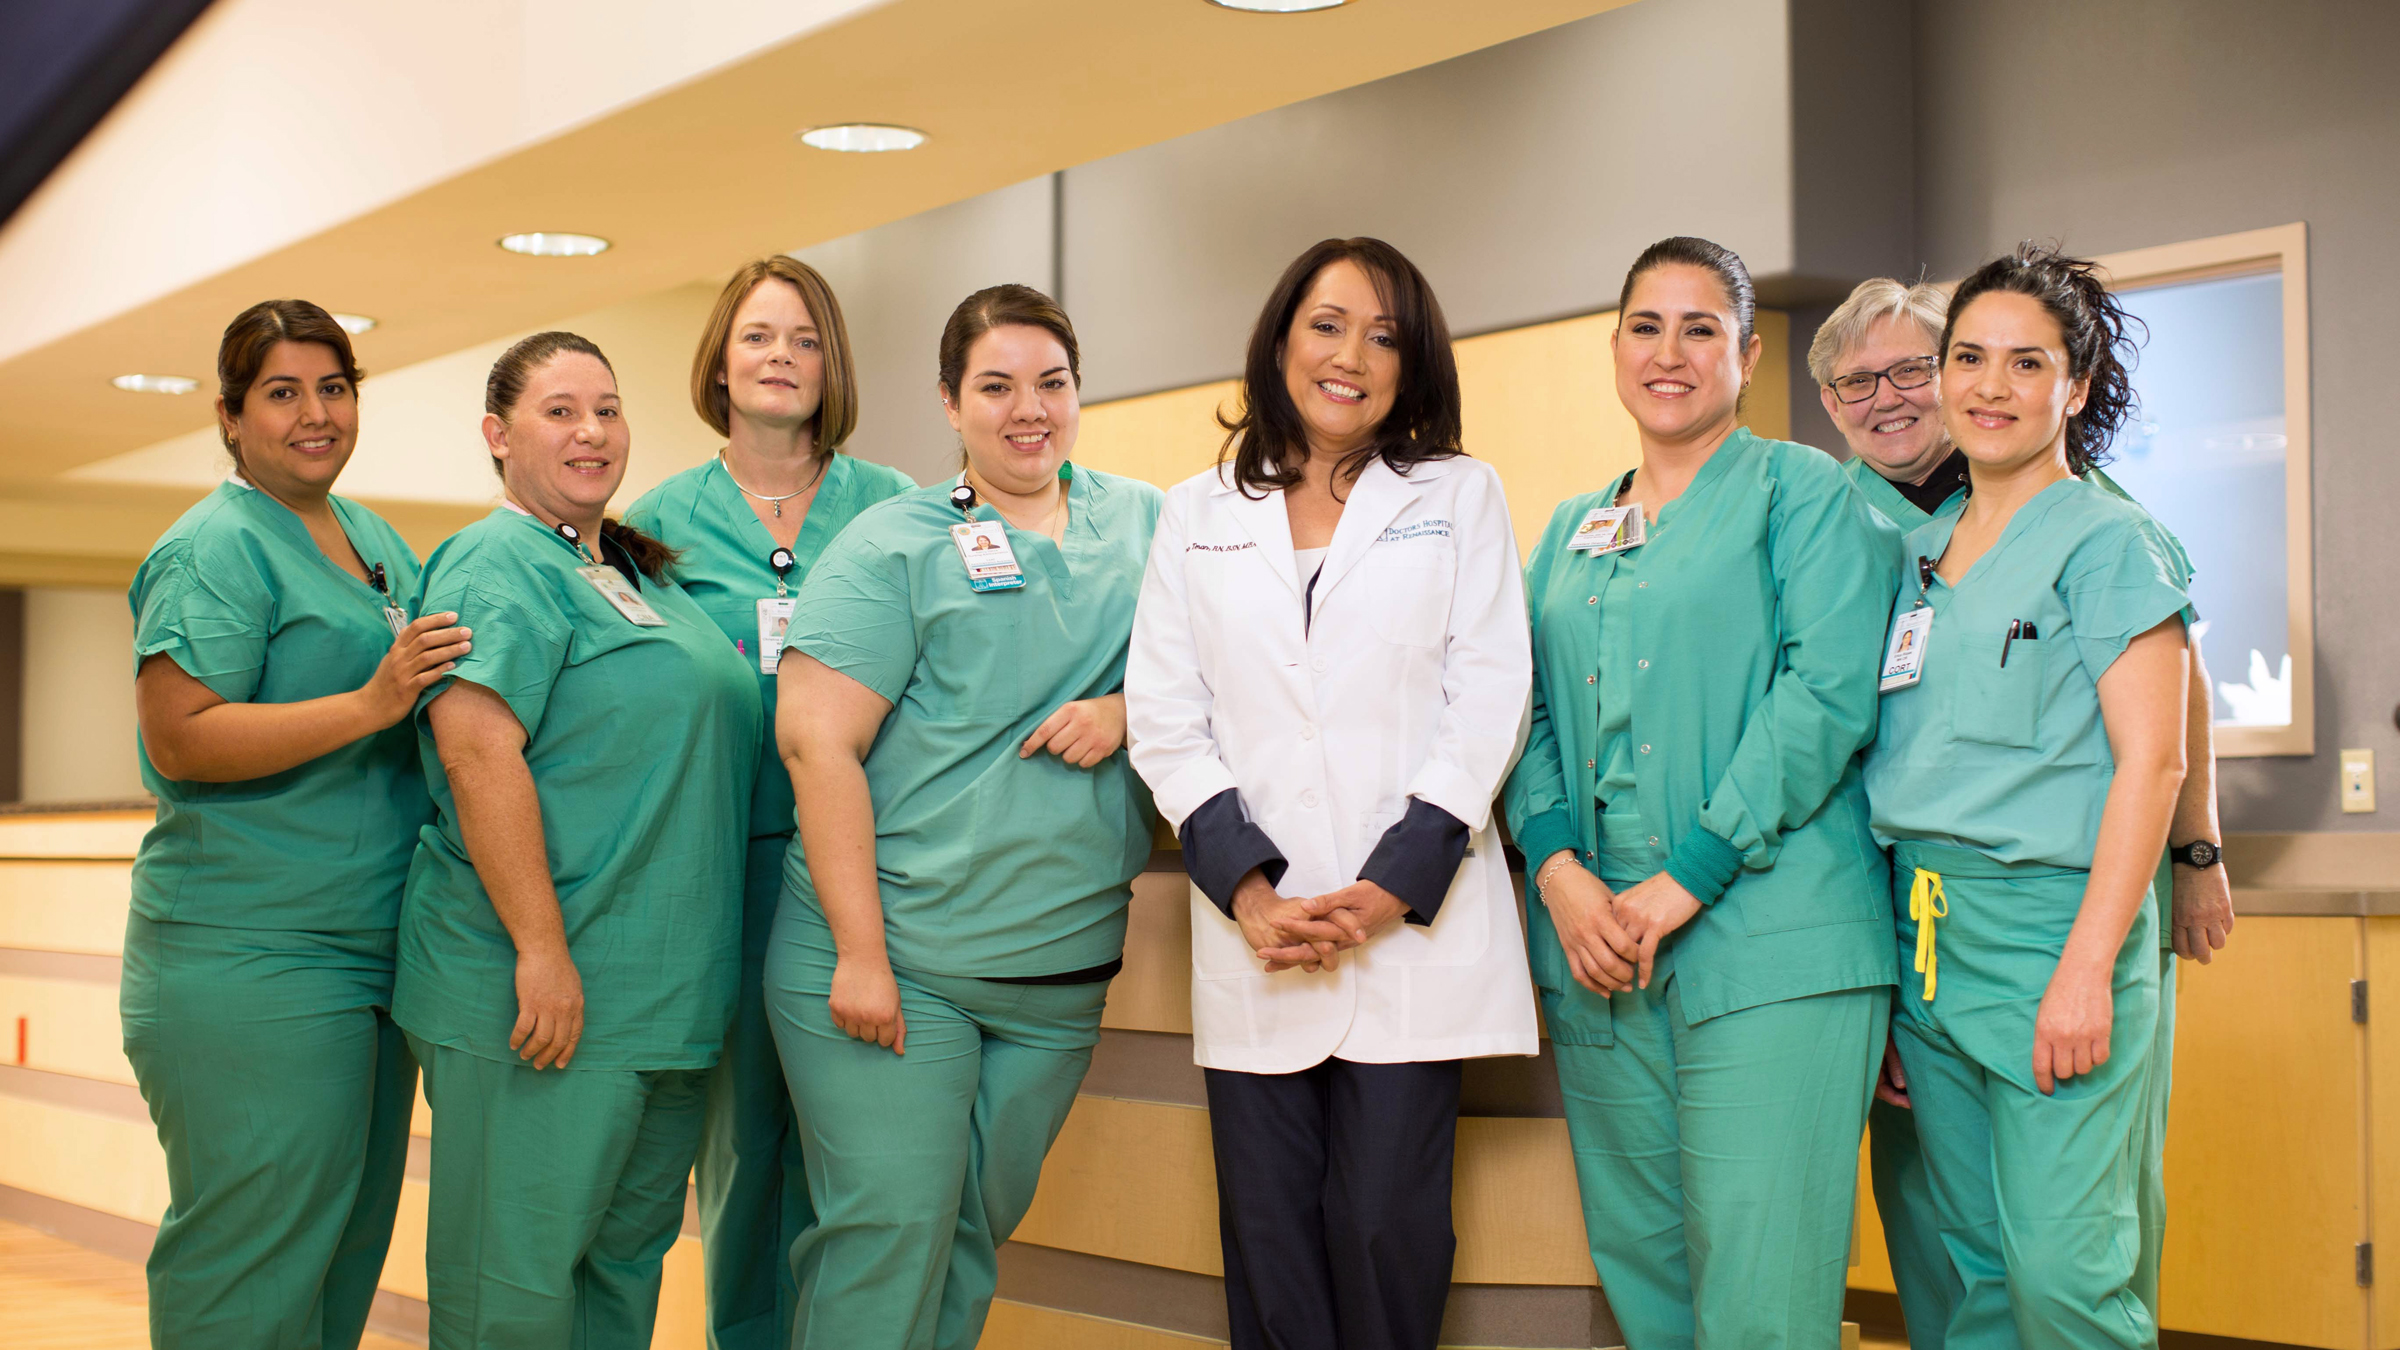 Doctors Hospital at Renaissance Health System continues to develop its programs and initiatives to improve health equity for all minority patients in the Rio Grande Valley.